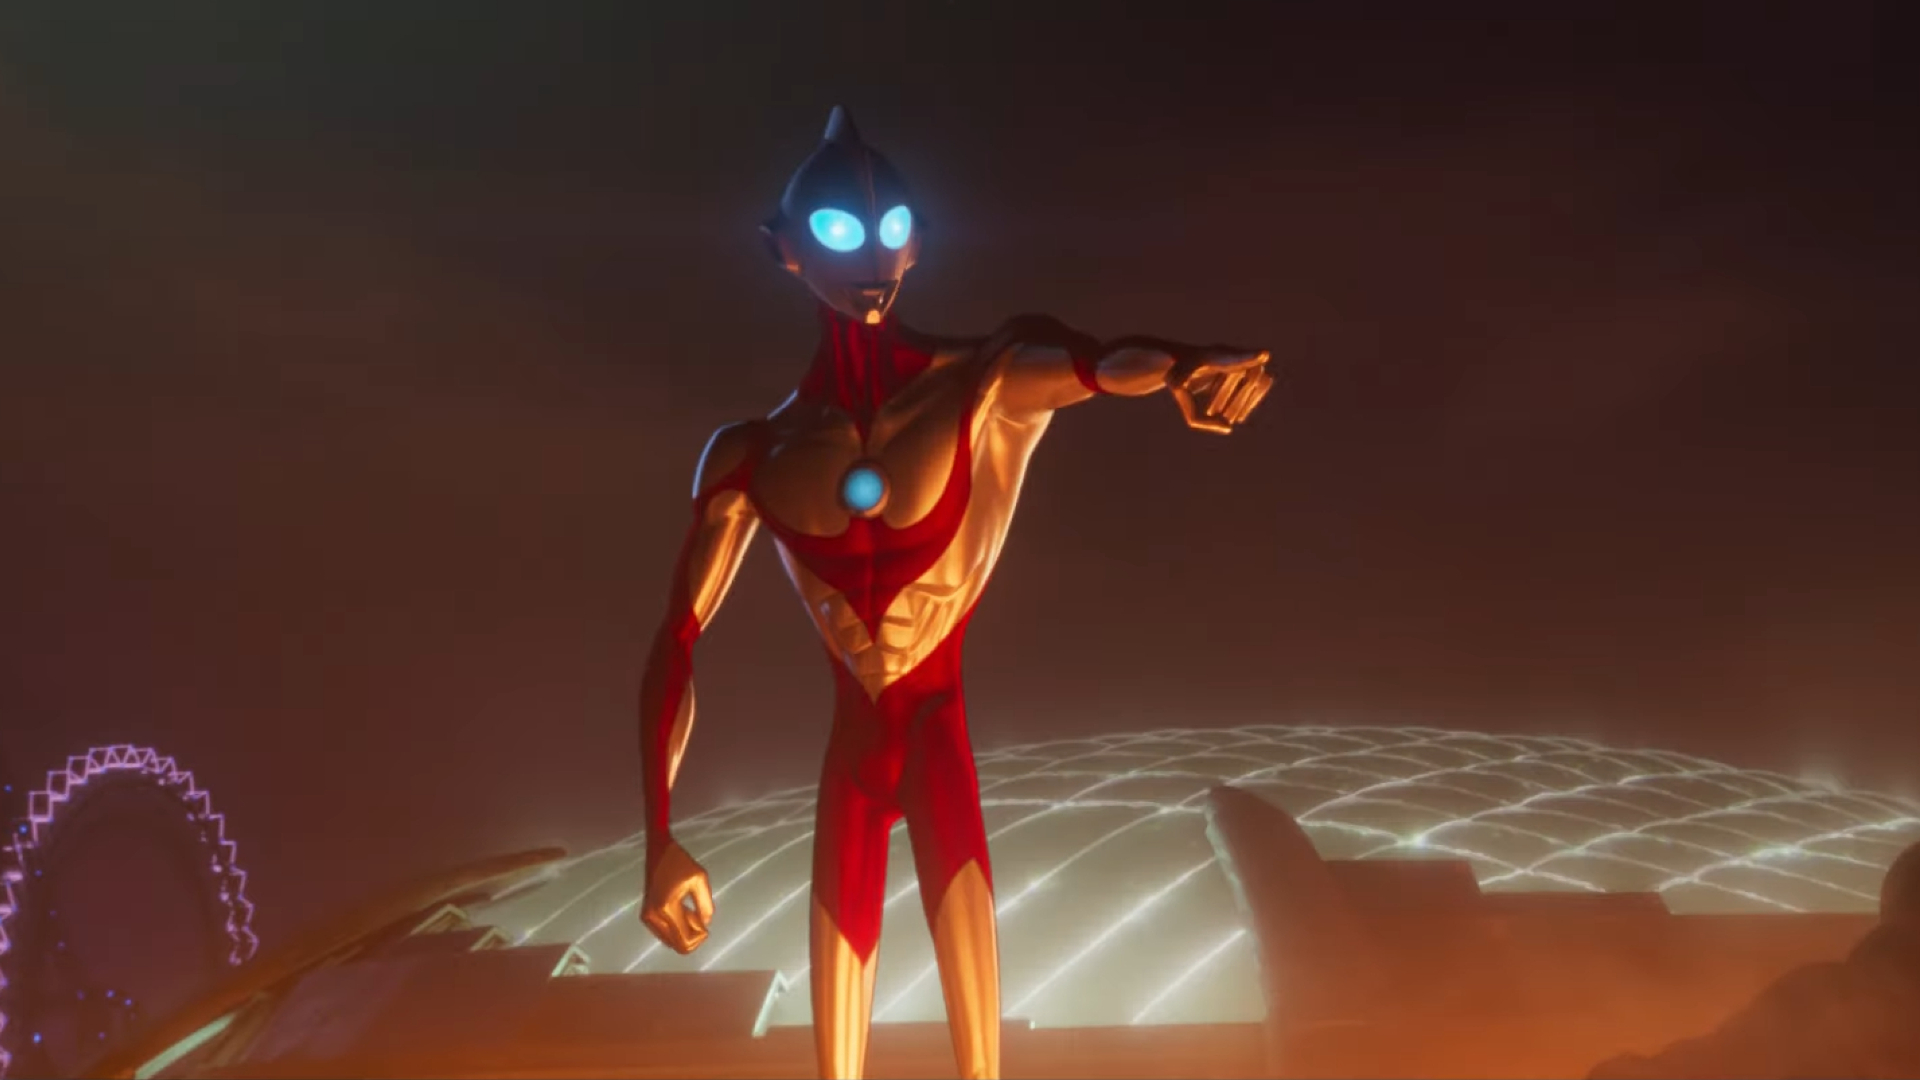 Ultraman Rising Trailer Teases A Dazzling Animated Take For The Giant Hero